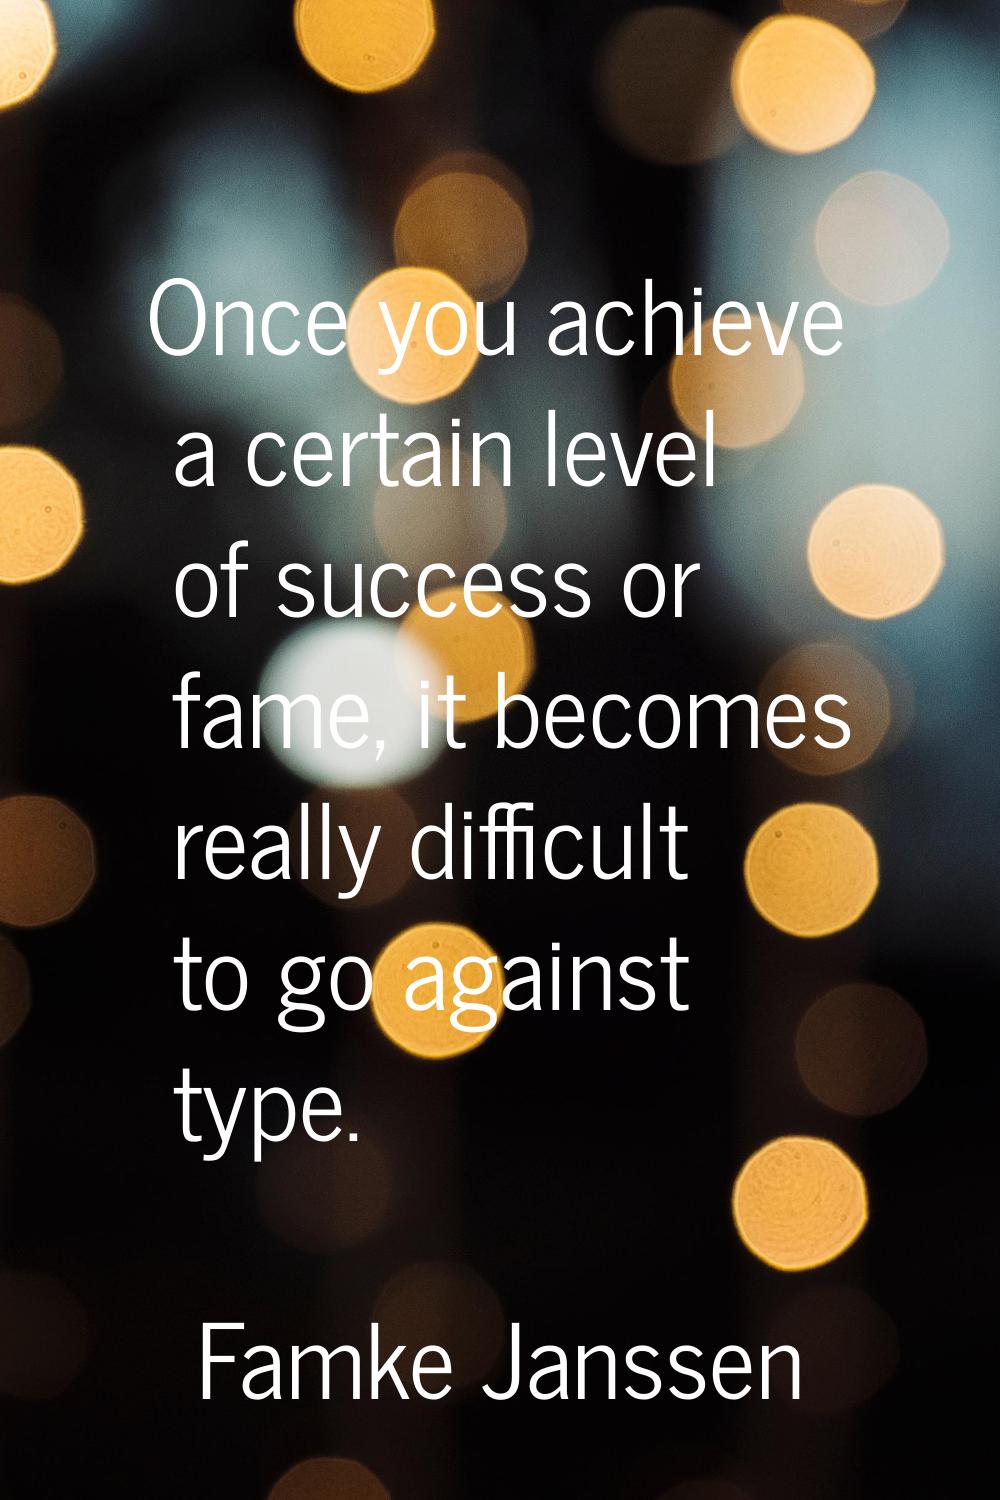 Once you achieve a certain level of success or fame, it becomes really difficult to go against type